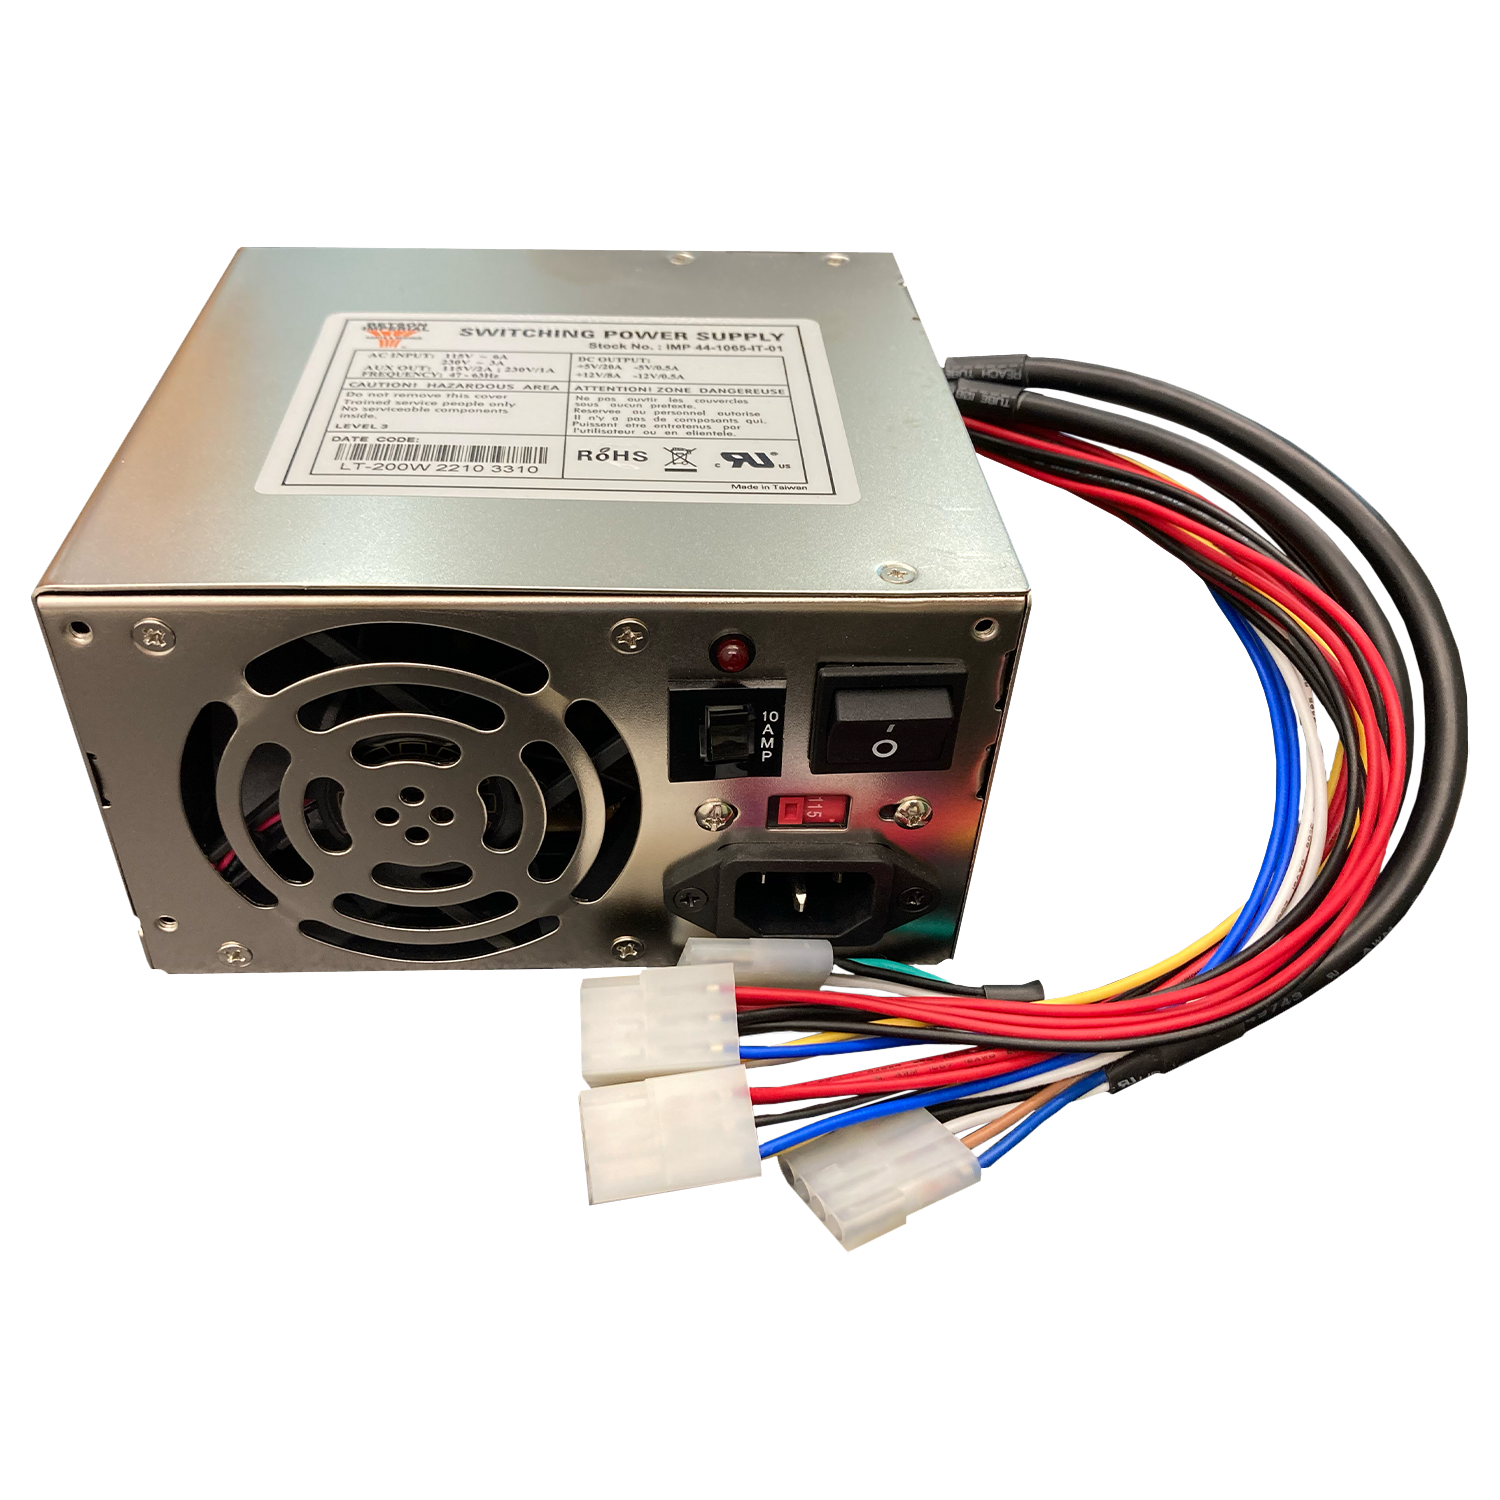 Sold by Miele Manufacturing. 200-Watt Power Supply with Resistor: Refurbished  Upgraded fan with lubricated sleeve bearing: life expectancy of 35,000 hours under optimal conditions W/S JT Power Cord (not included)